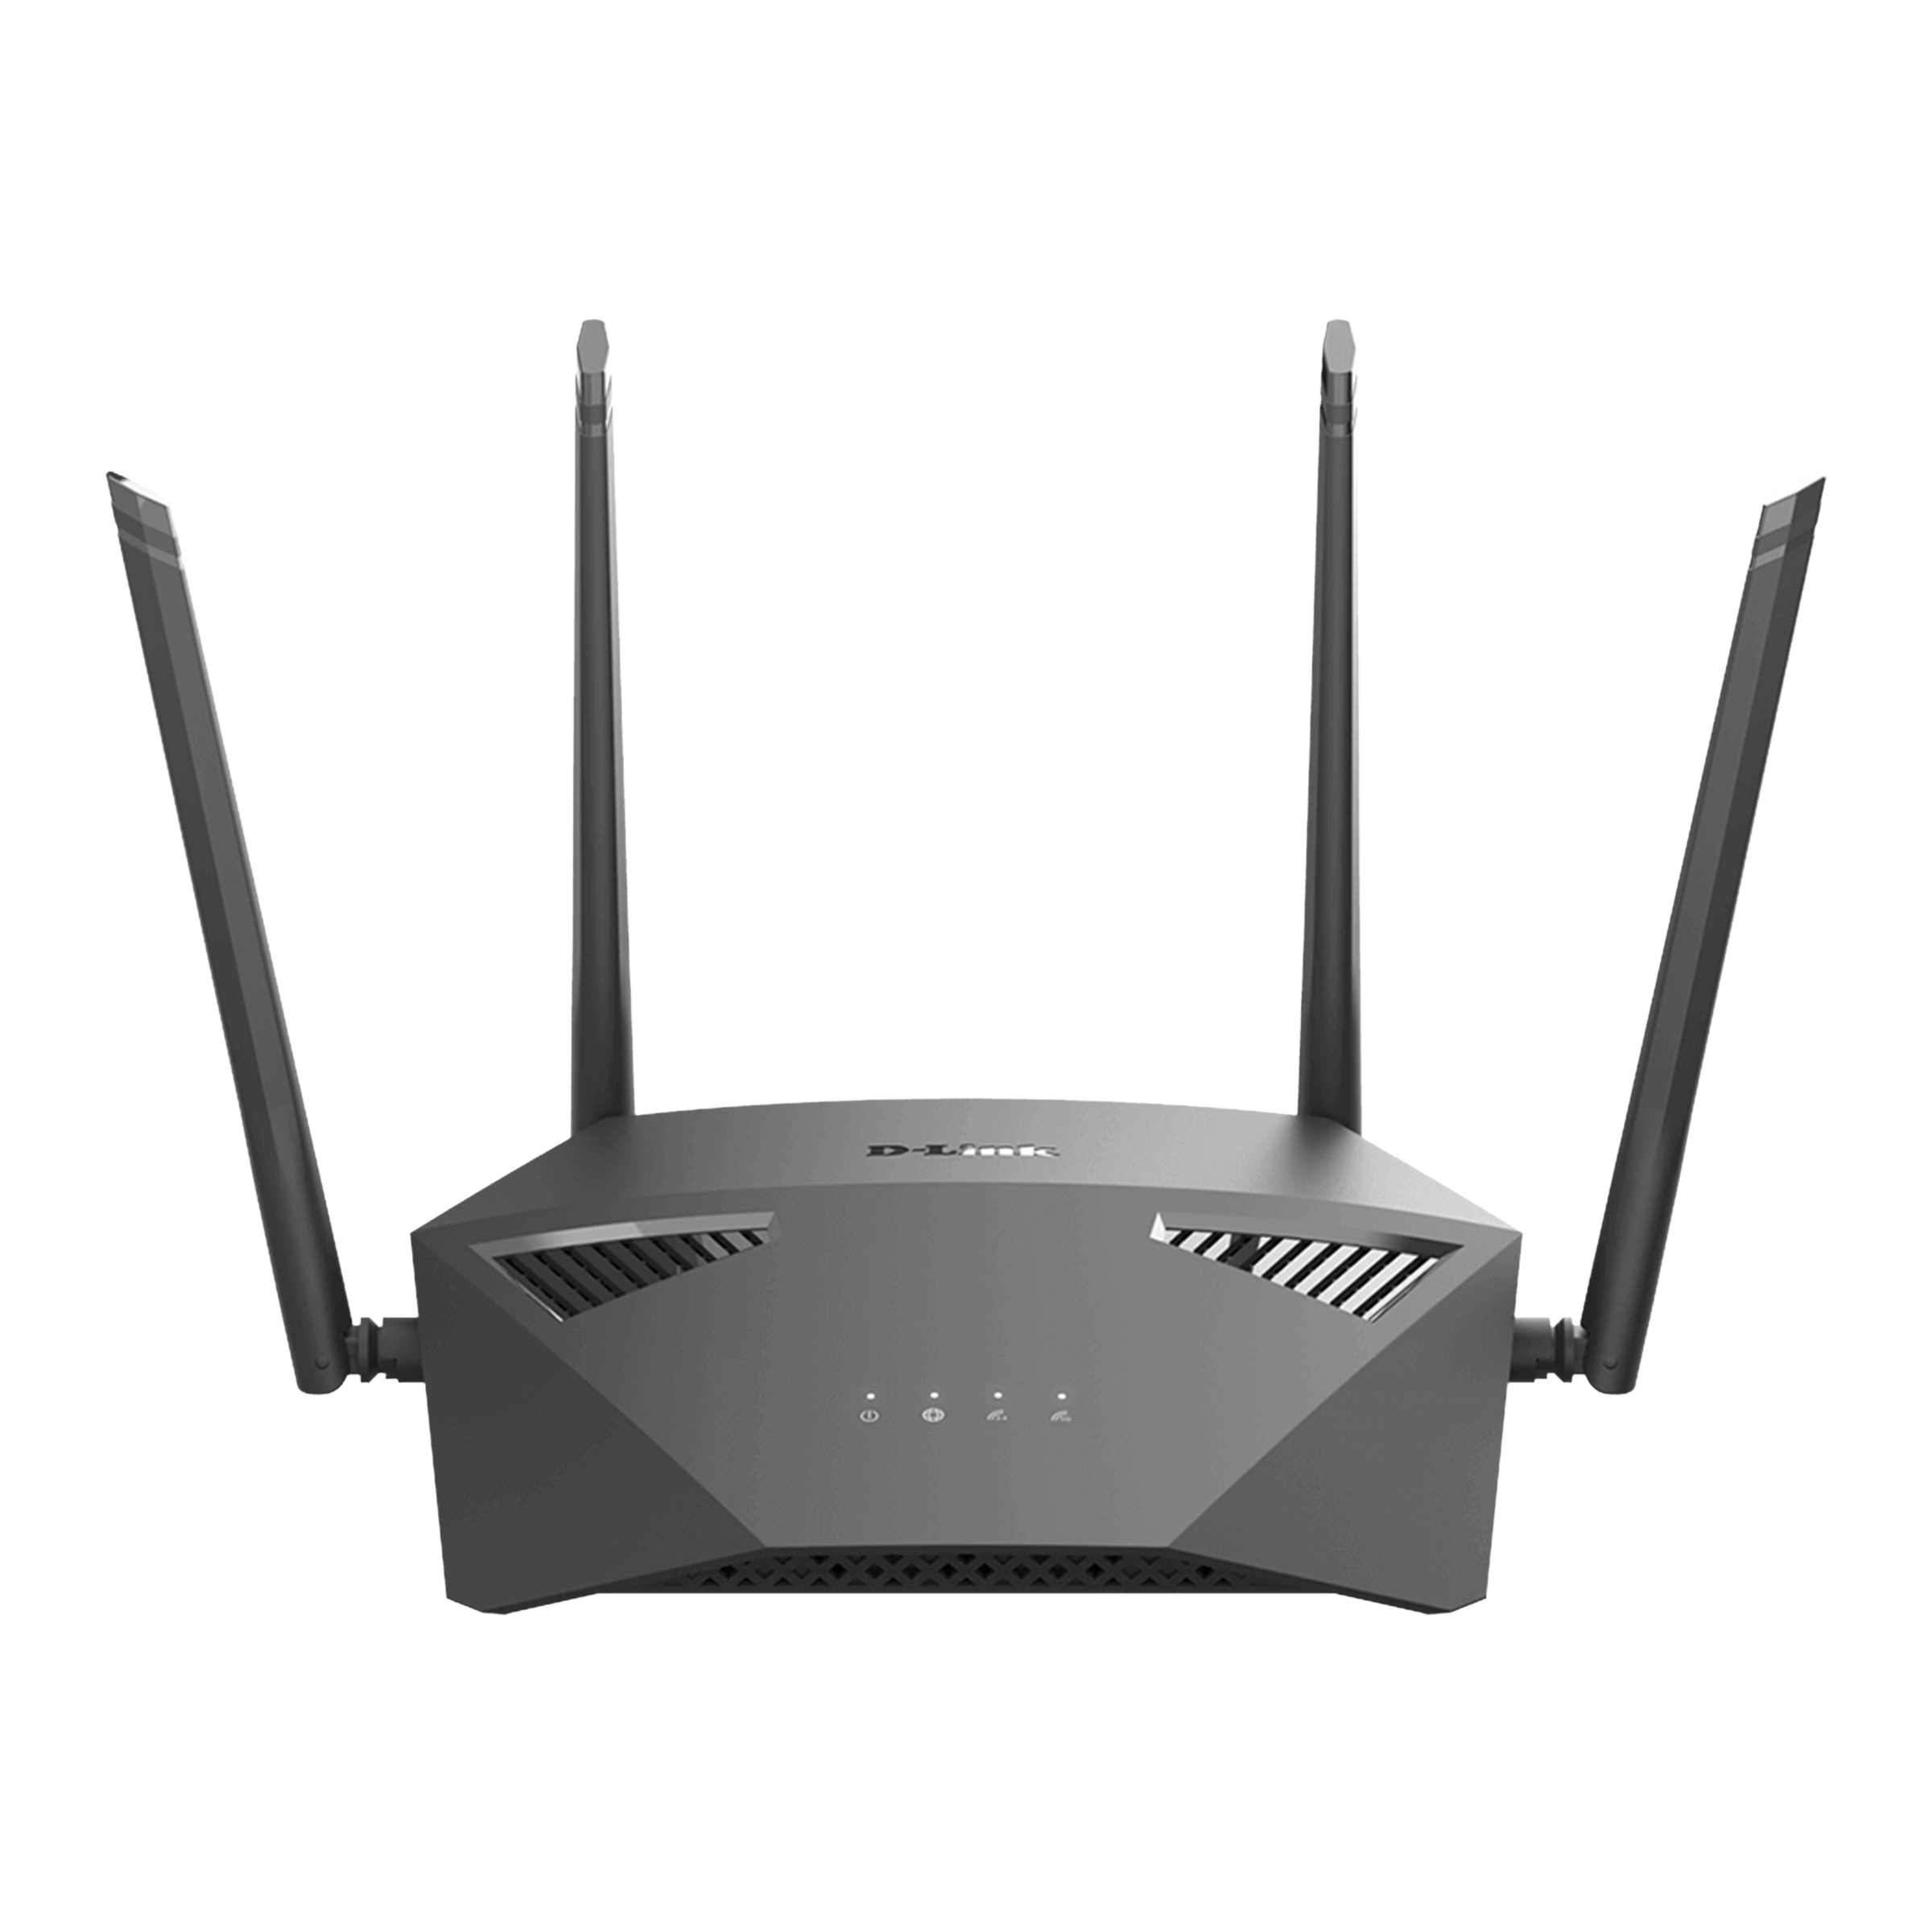 D-Link AC 1900 Dual Band 1300 Mbps WiFi EasyMesh Router (4 Antennas, 4 LAN Ports, MU-MIMO Supported, DIR-1950, Black)_1